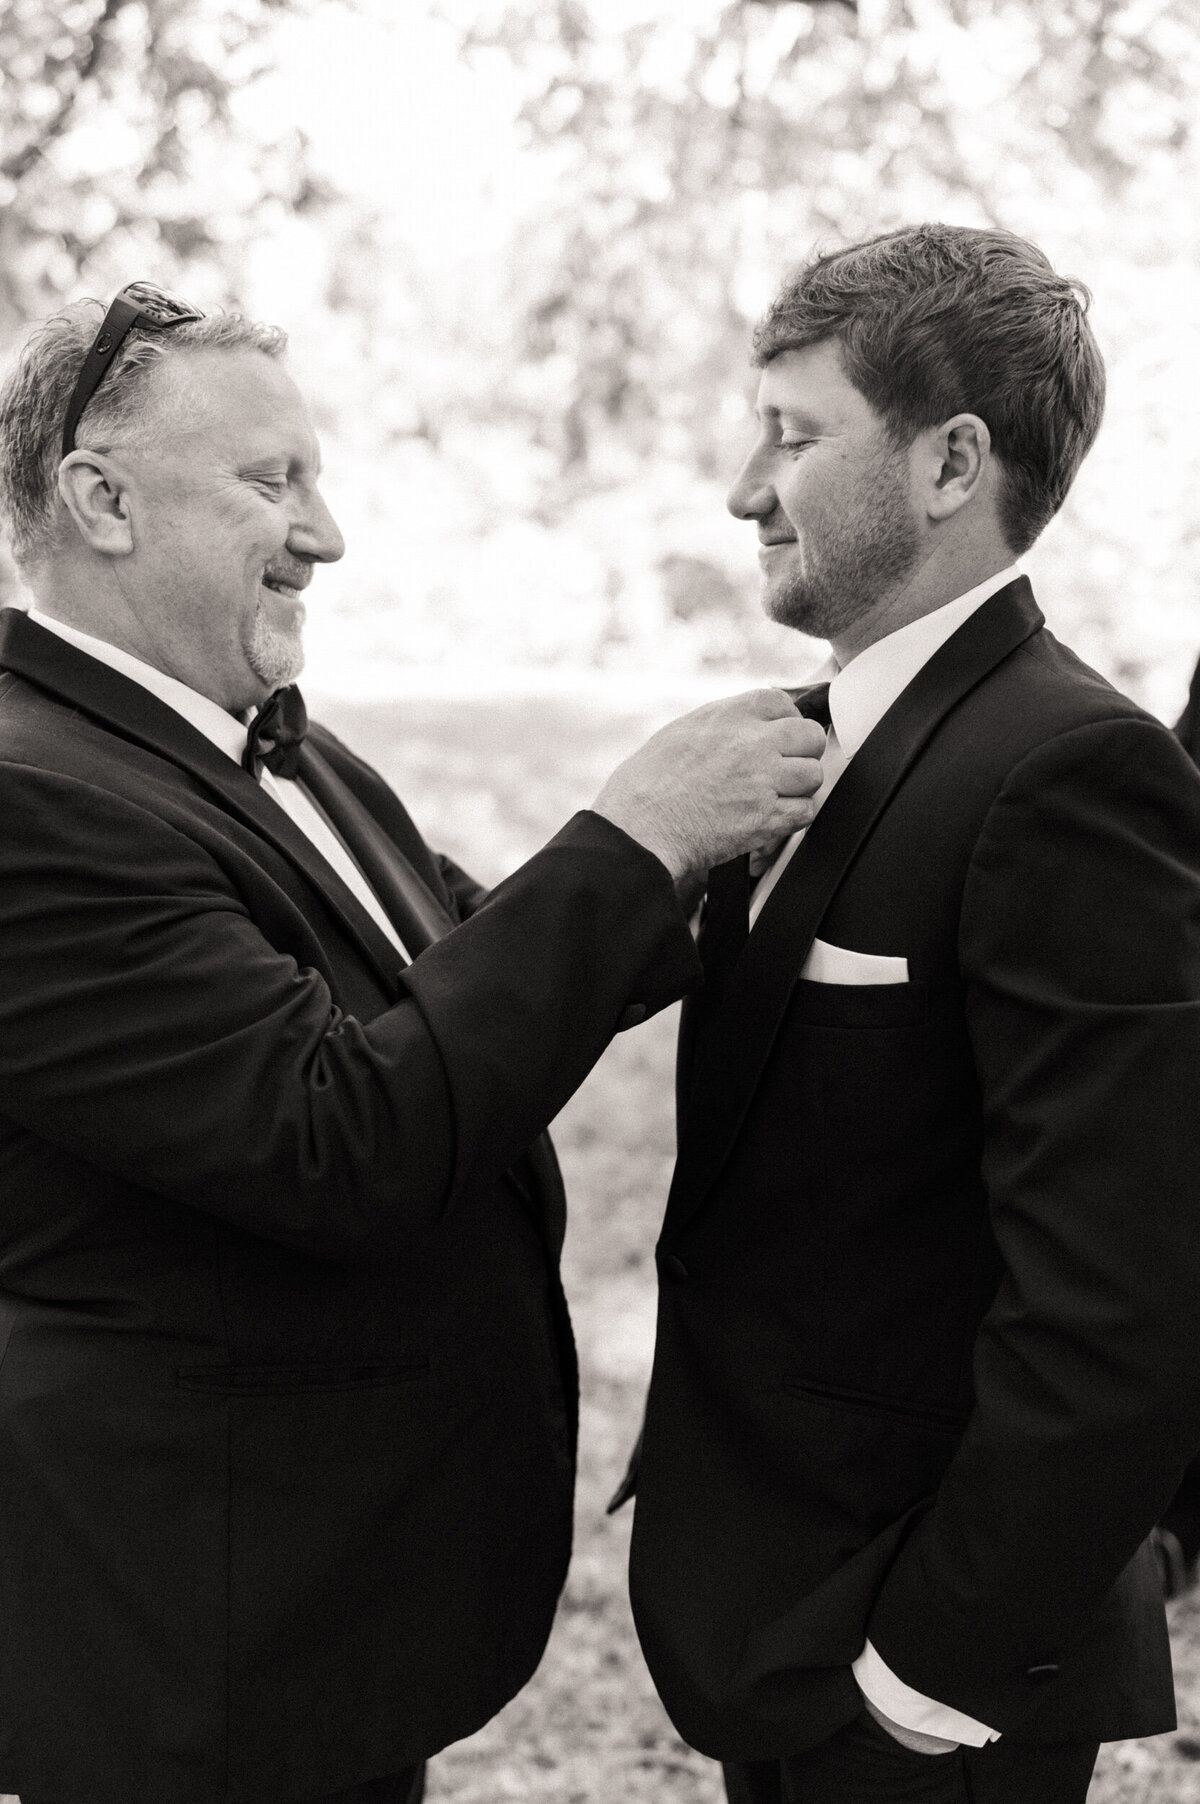 Groom's dad helping his son get ready and tying his tie on his wedding day